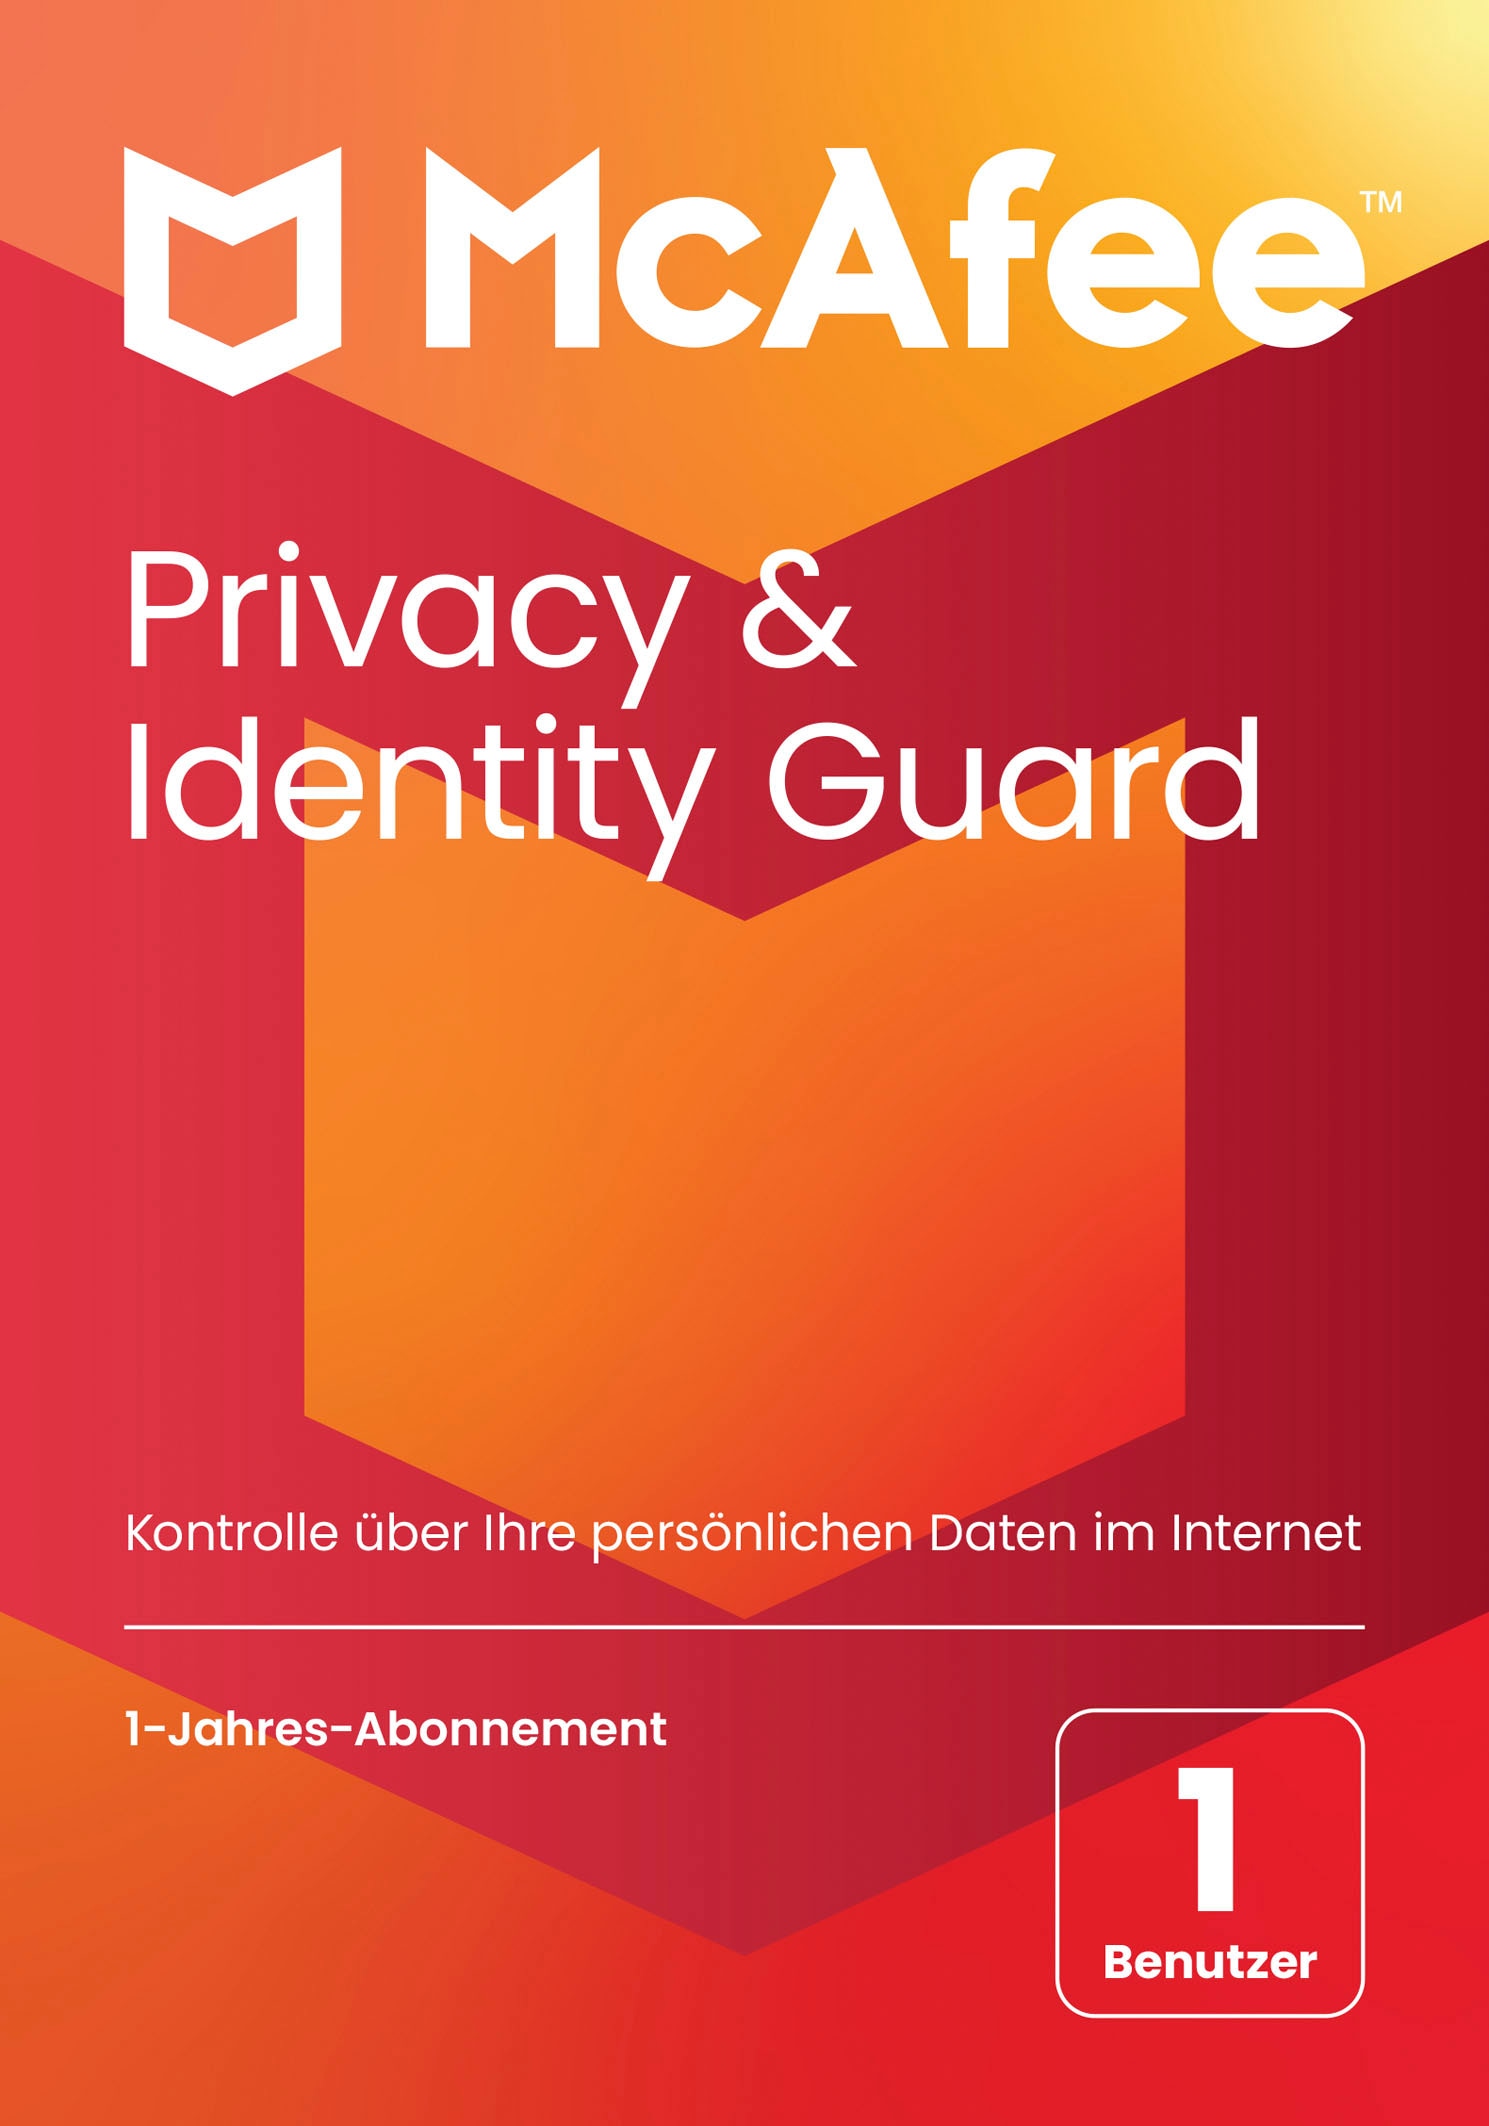 Virensoftware »McAfee Privacy & Identity Guard«